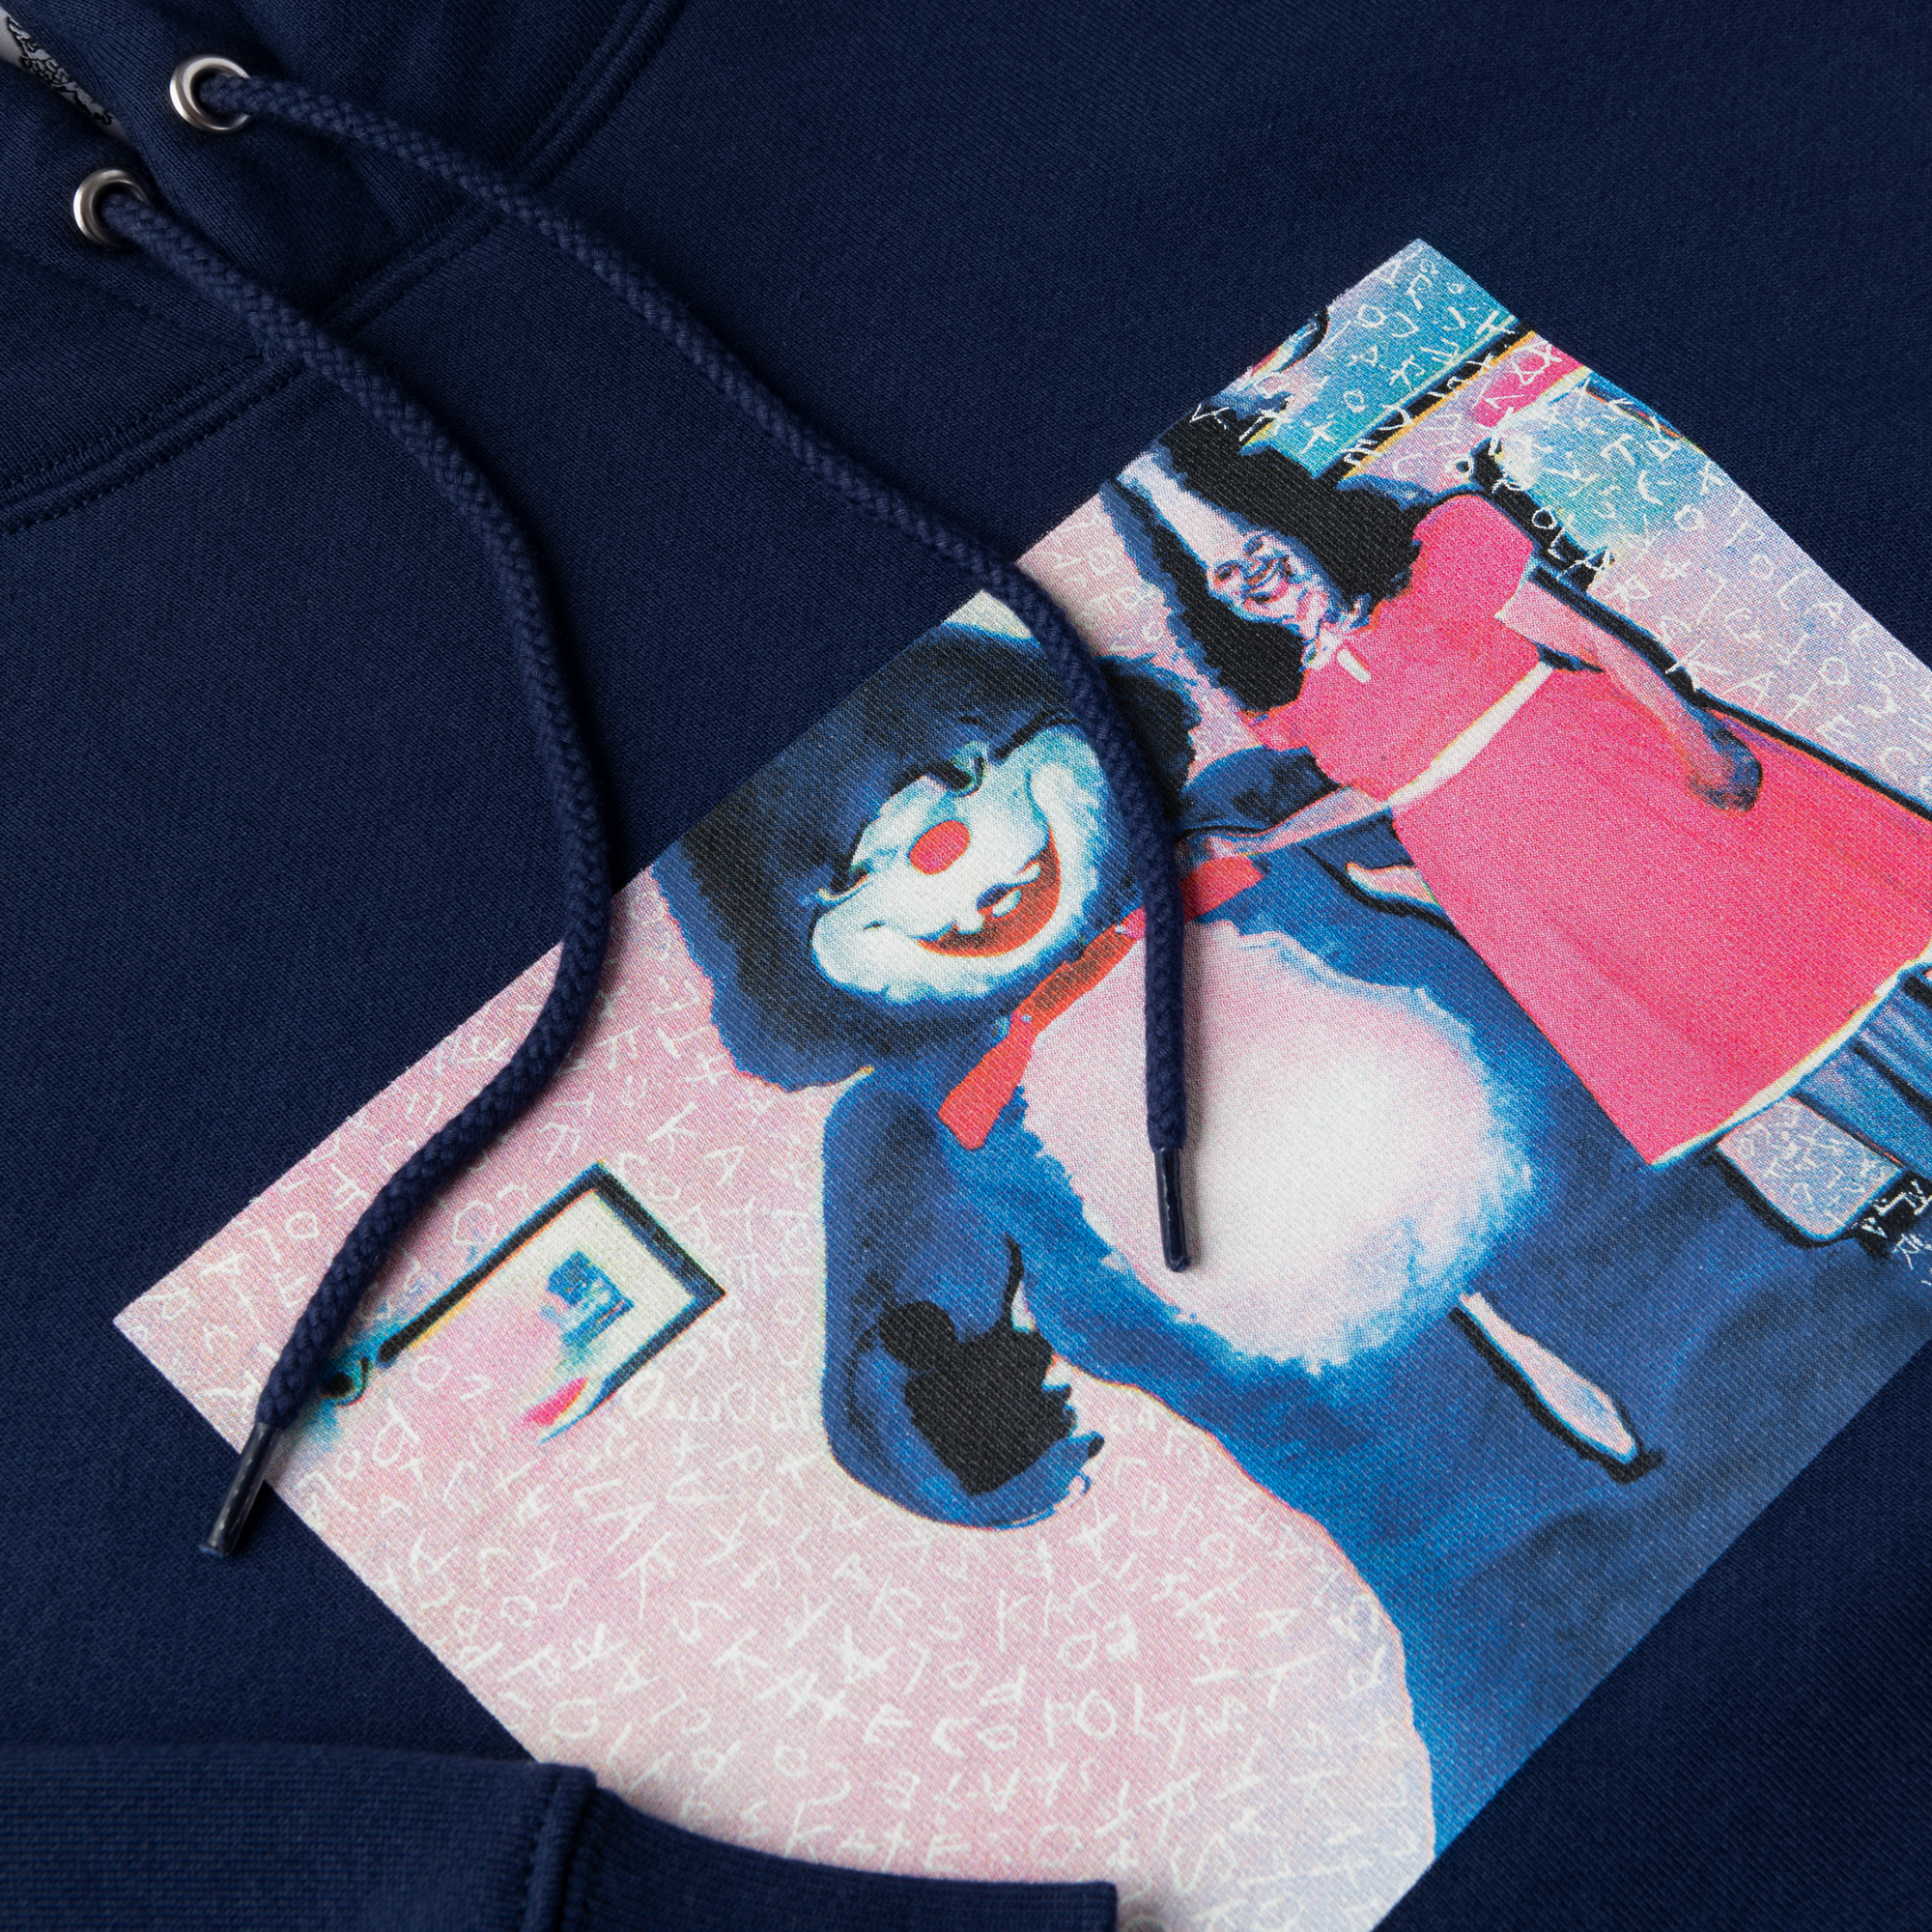 Dark blue polar hooded sweatshirt with pink and blue box logo on front. Free uk shipping on orders over £50